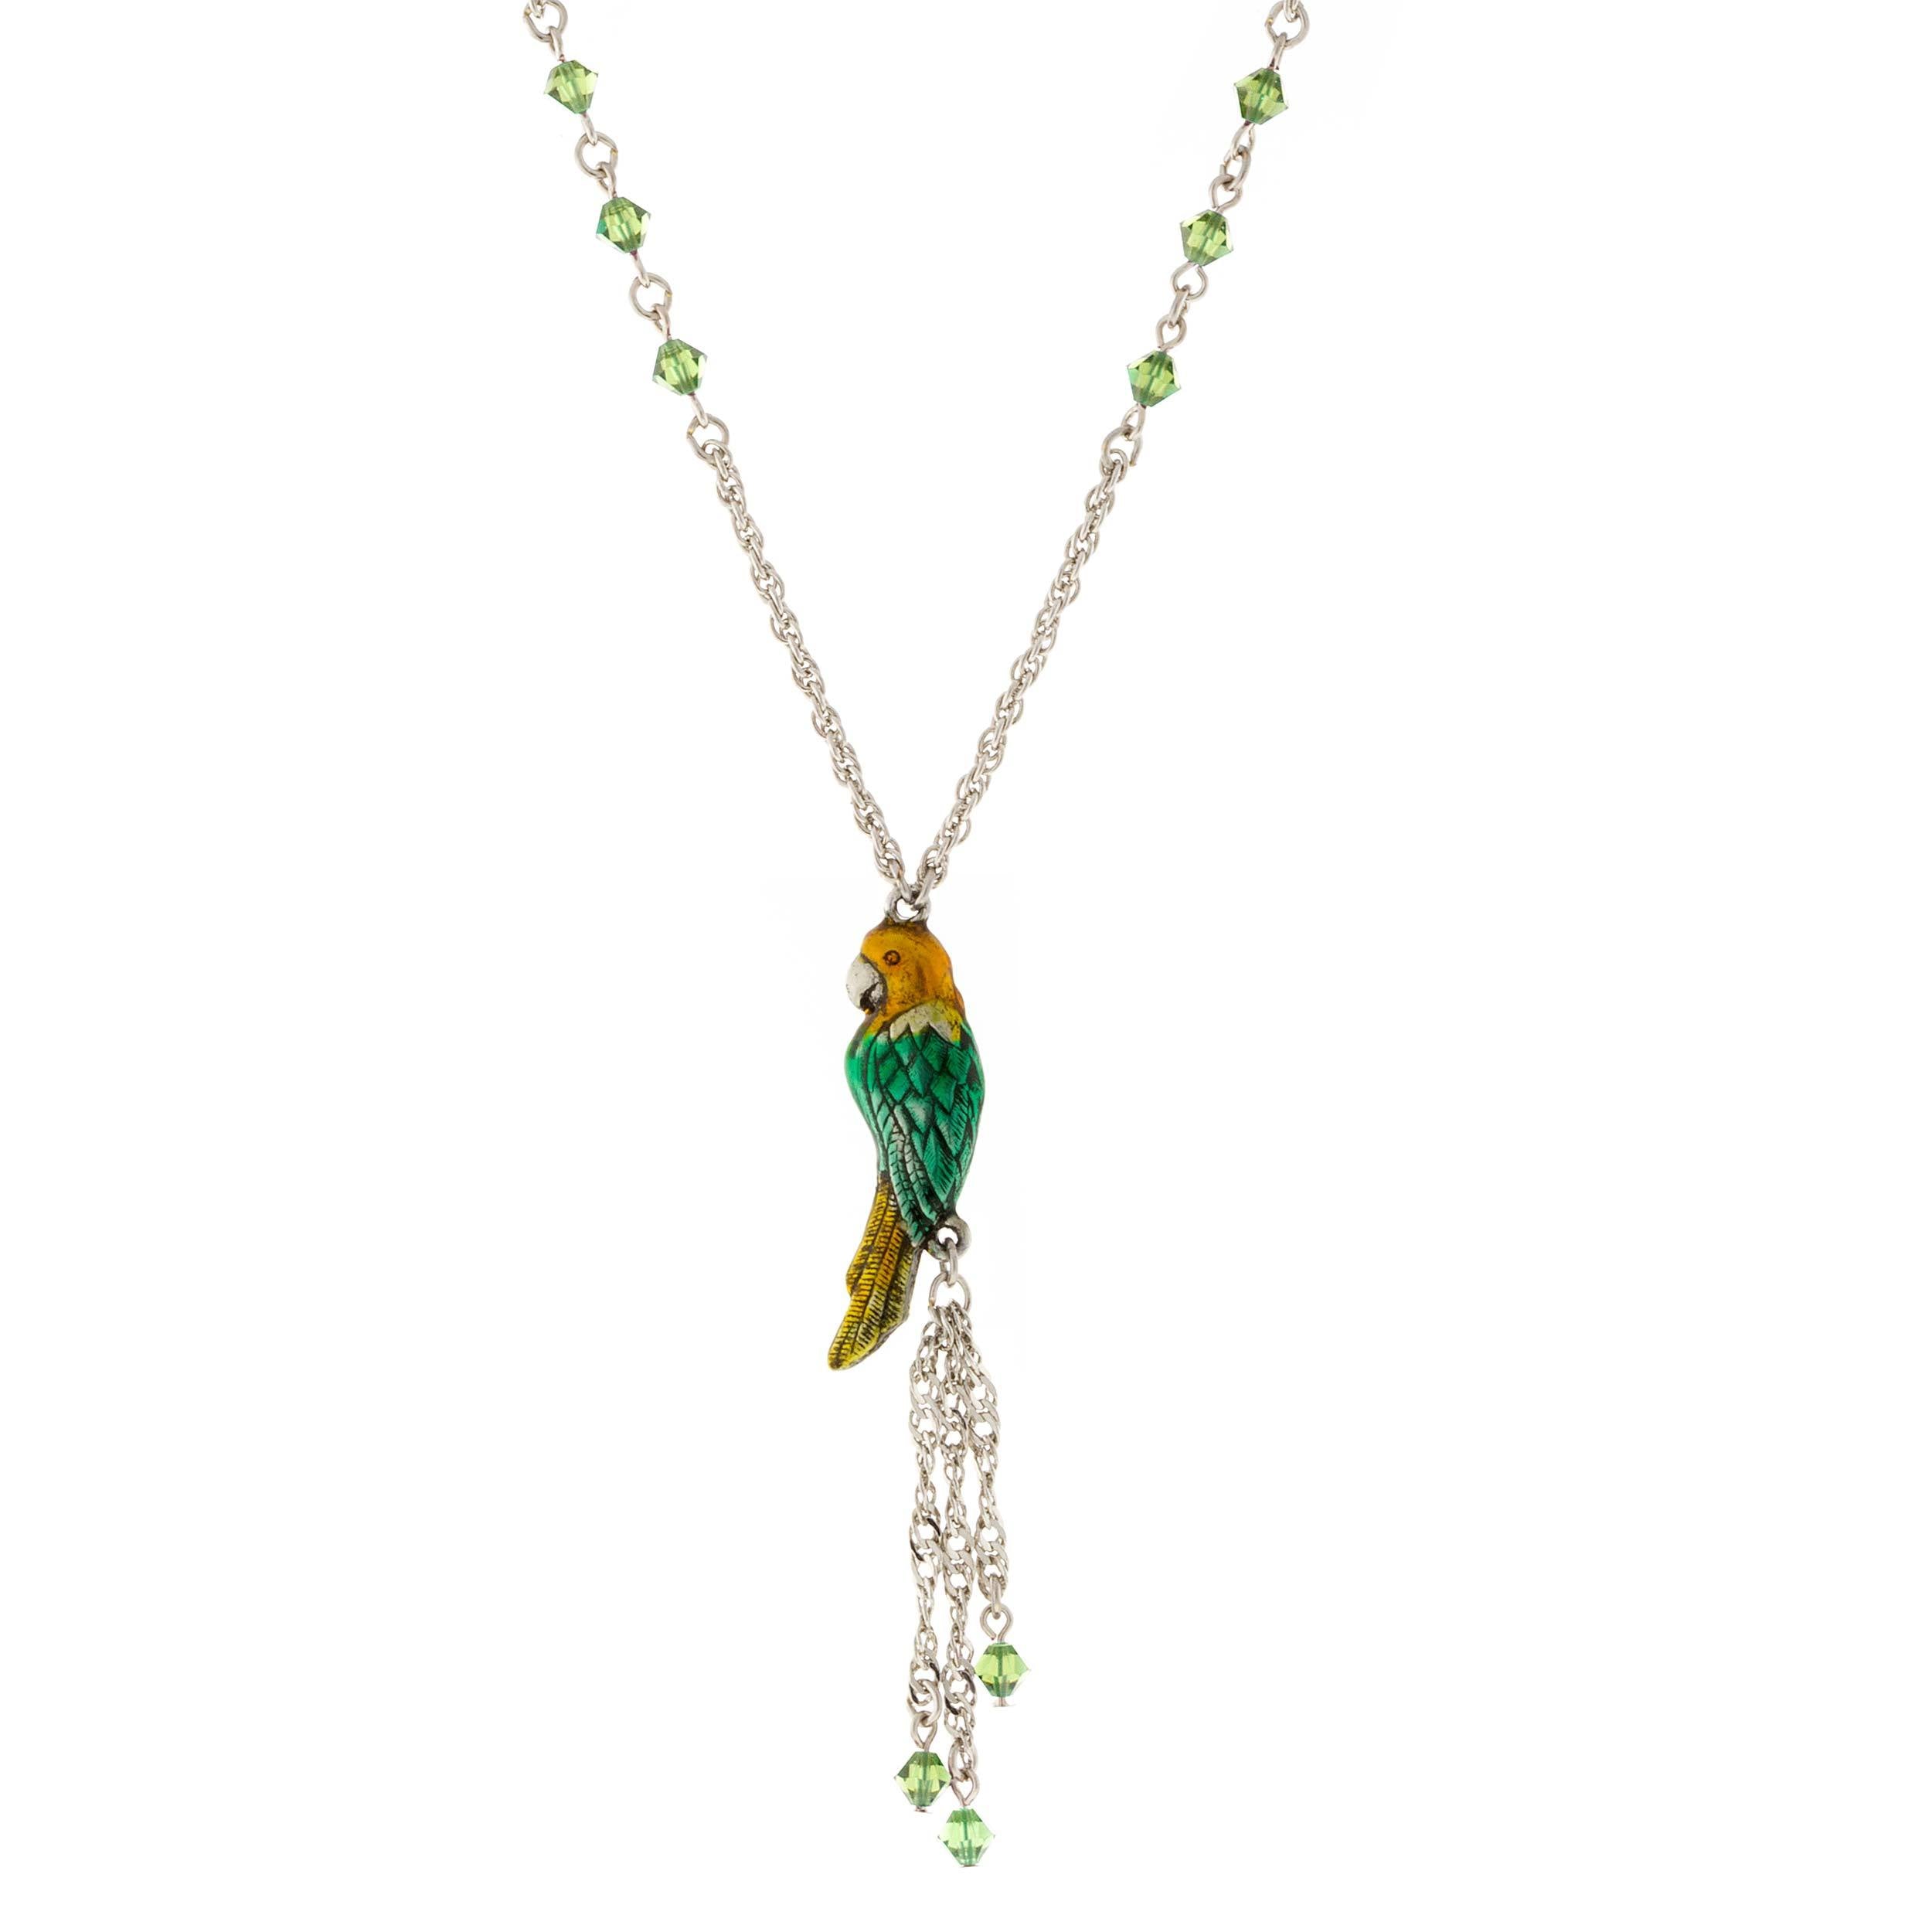 Silver Tone Green & Yellow Enamel Parrot With Green Beads Necklace 16Adj.